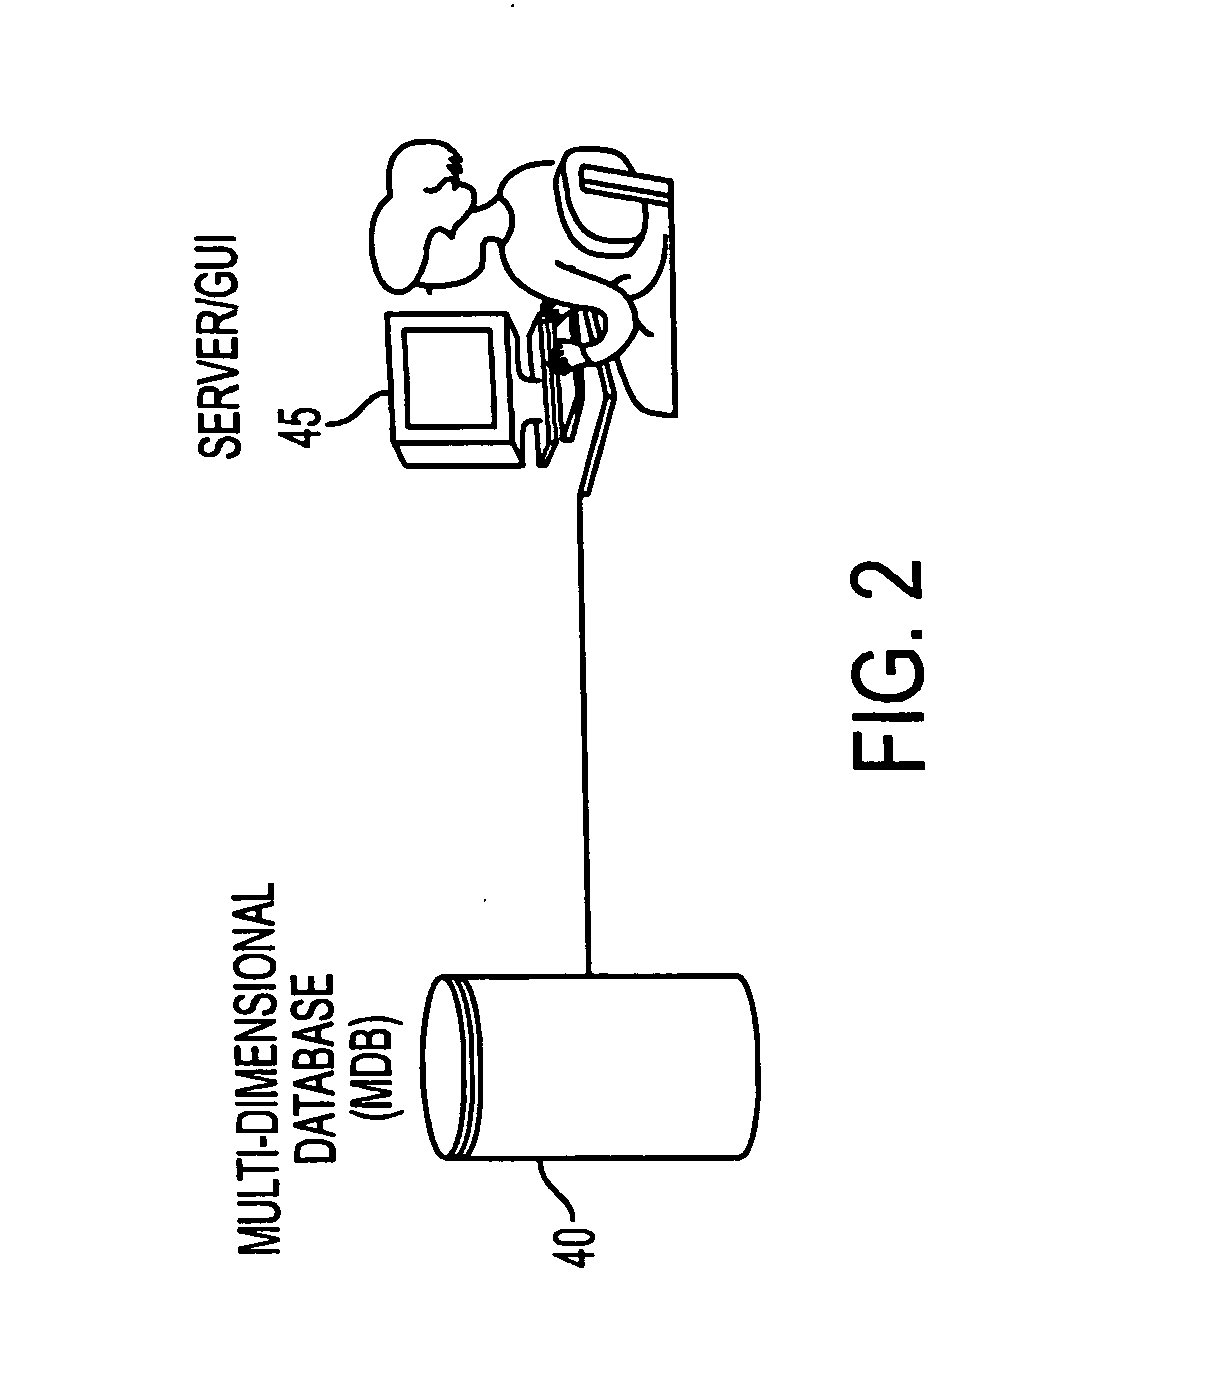 Systems and methods for representing and editing multi-dimensional data